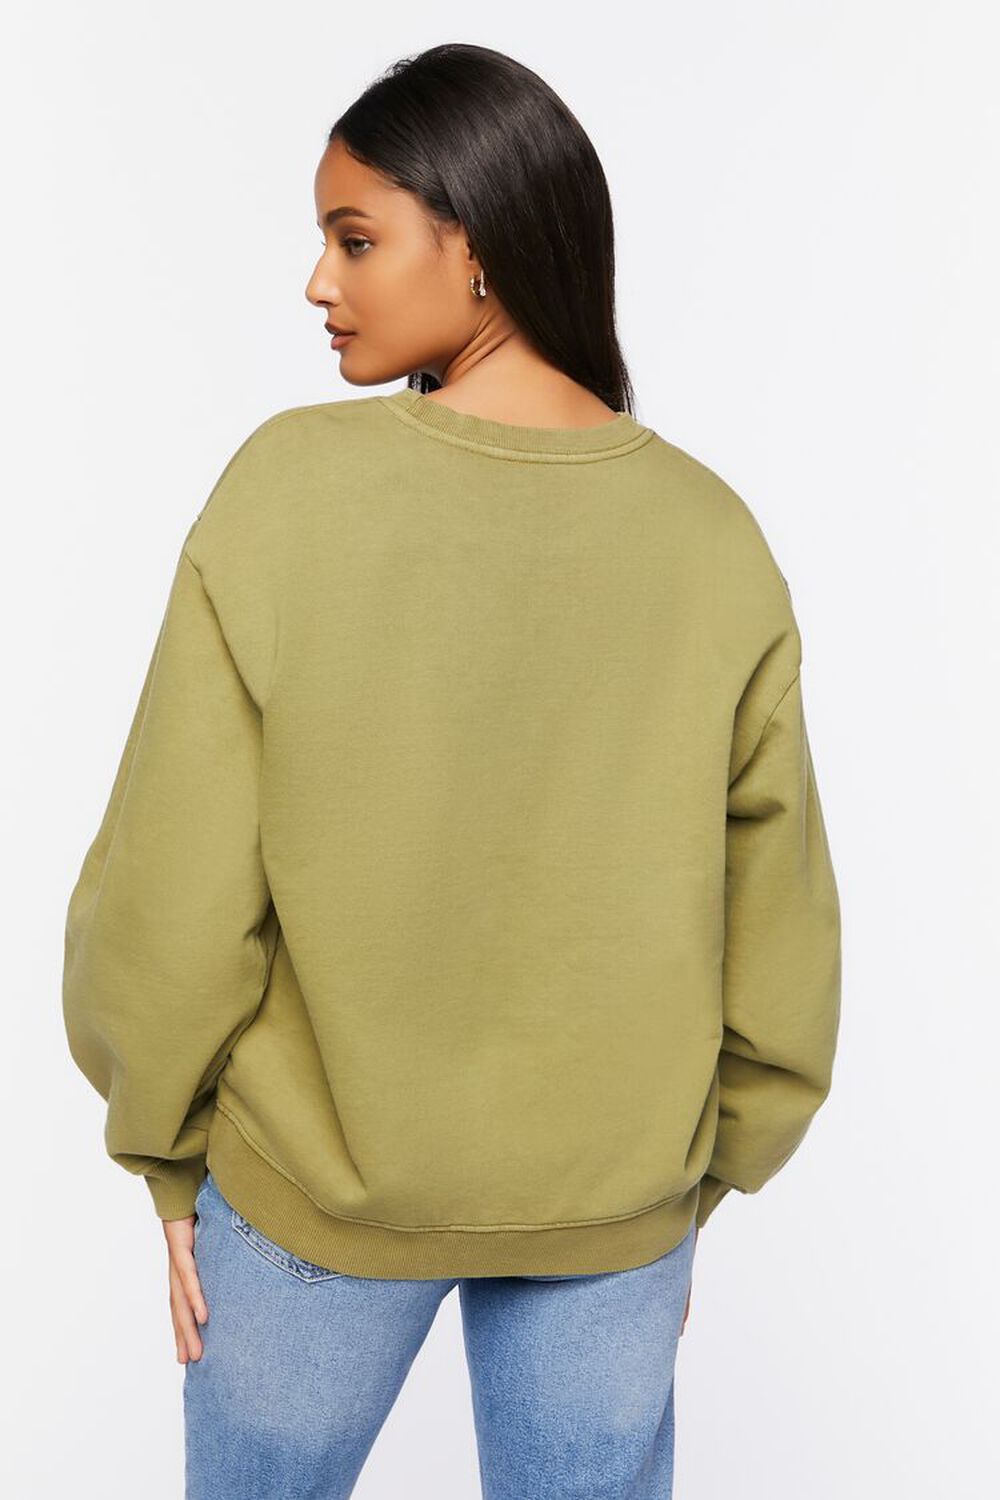 OLIVE Ribbed-Trim Crew Neck Pullover, image 3